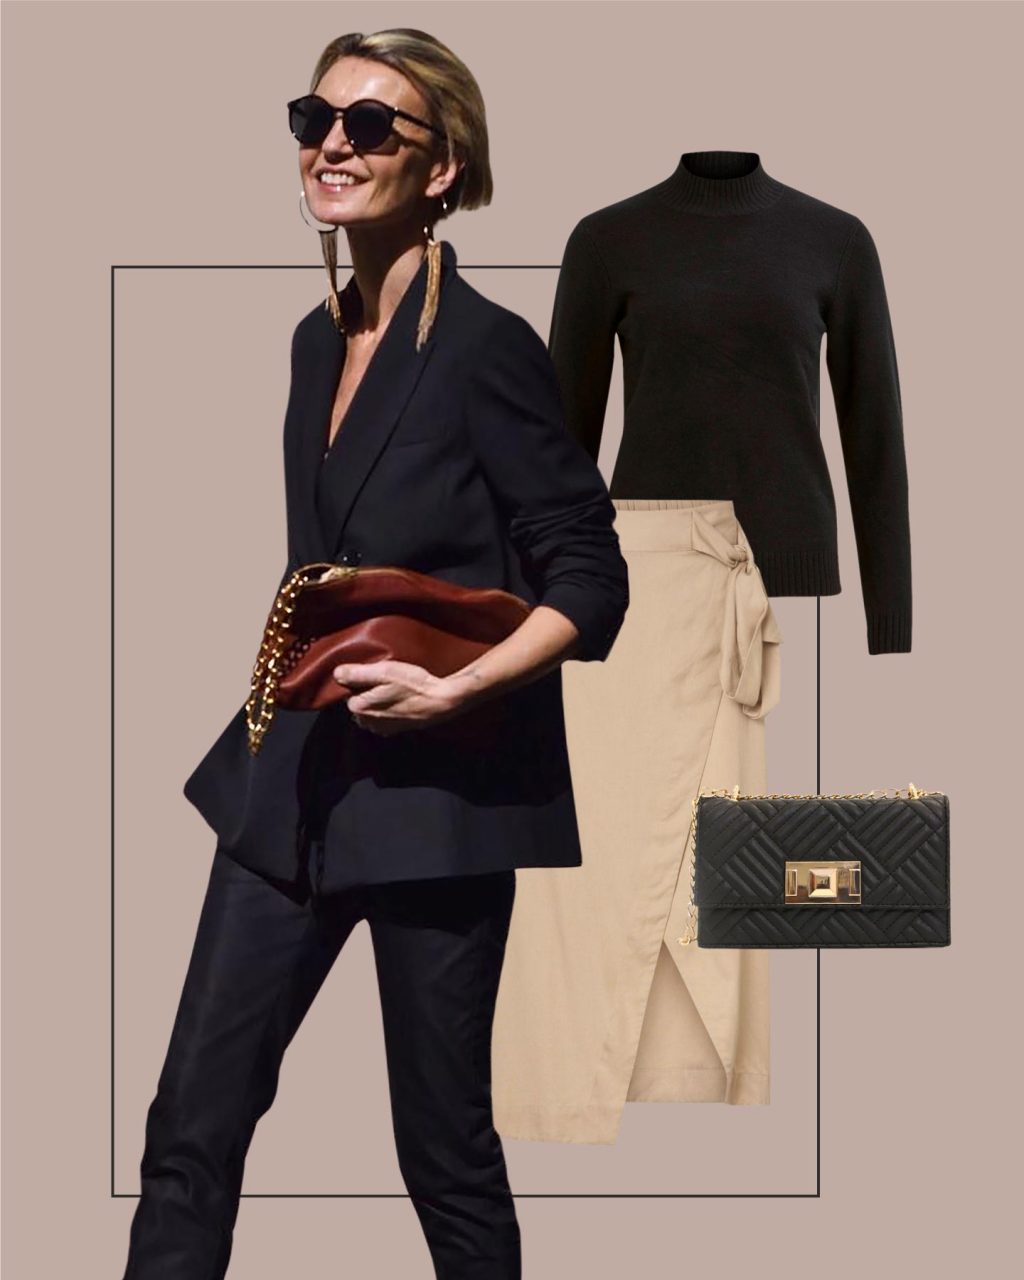 What to Wear in Your 50s: 21 Styling Secrets to Always Look Chic